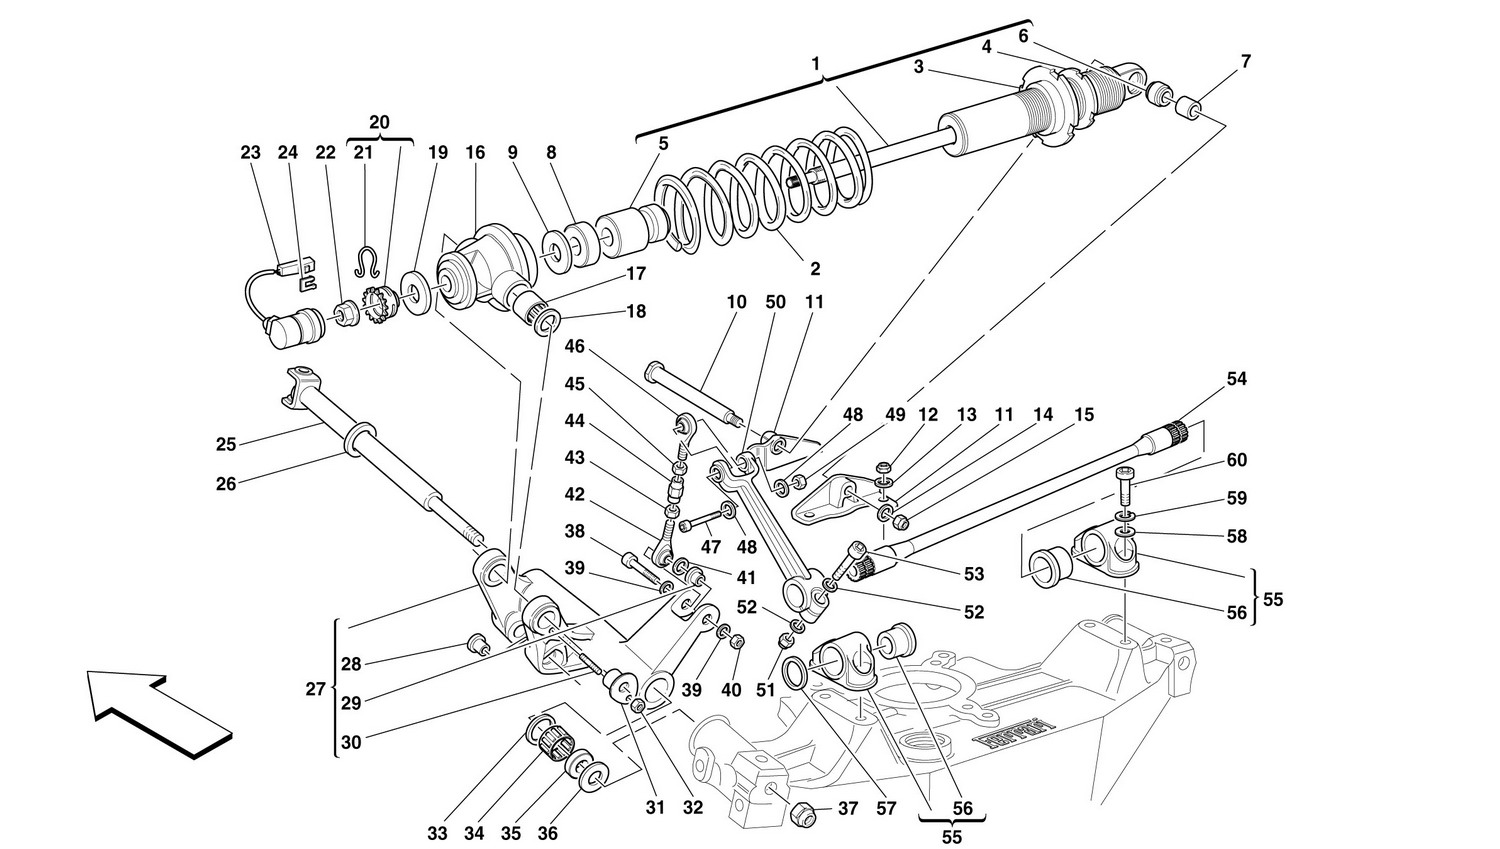 Schematic: Rear Suspension - Shock Absorber And Stabilizer Bar